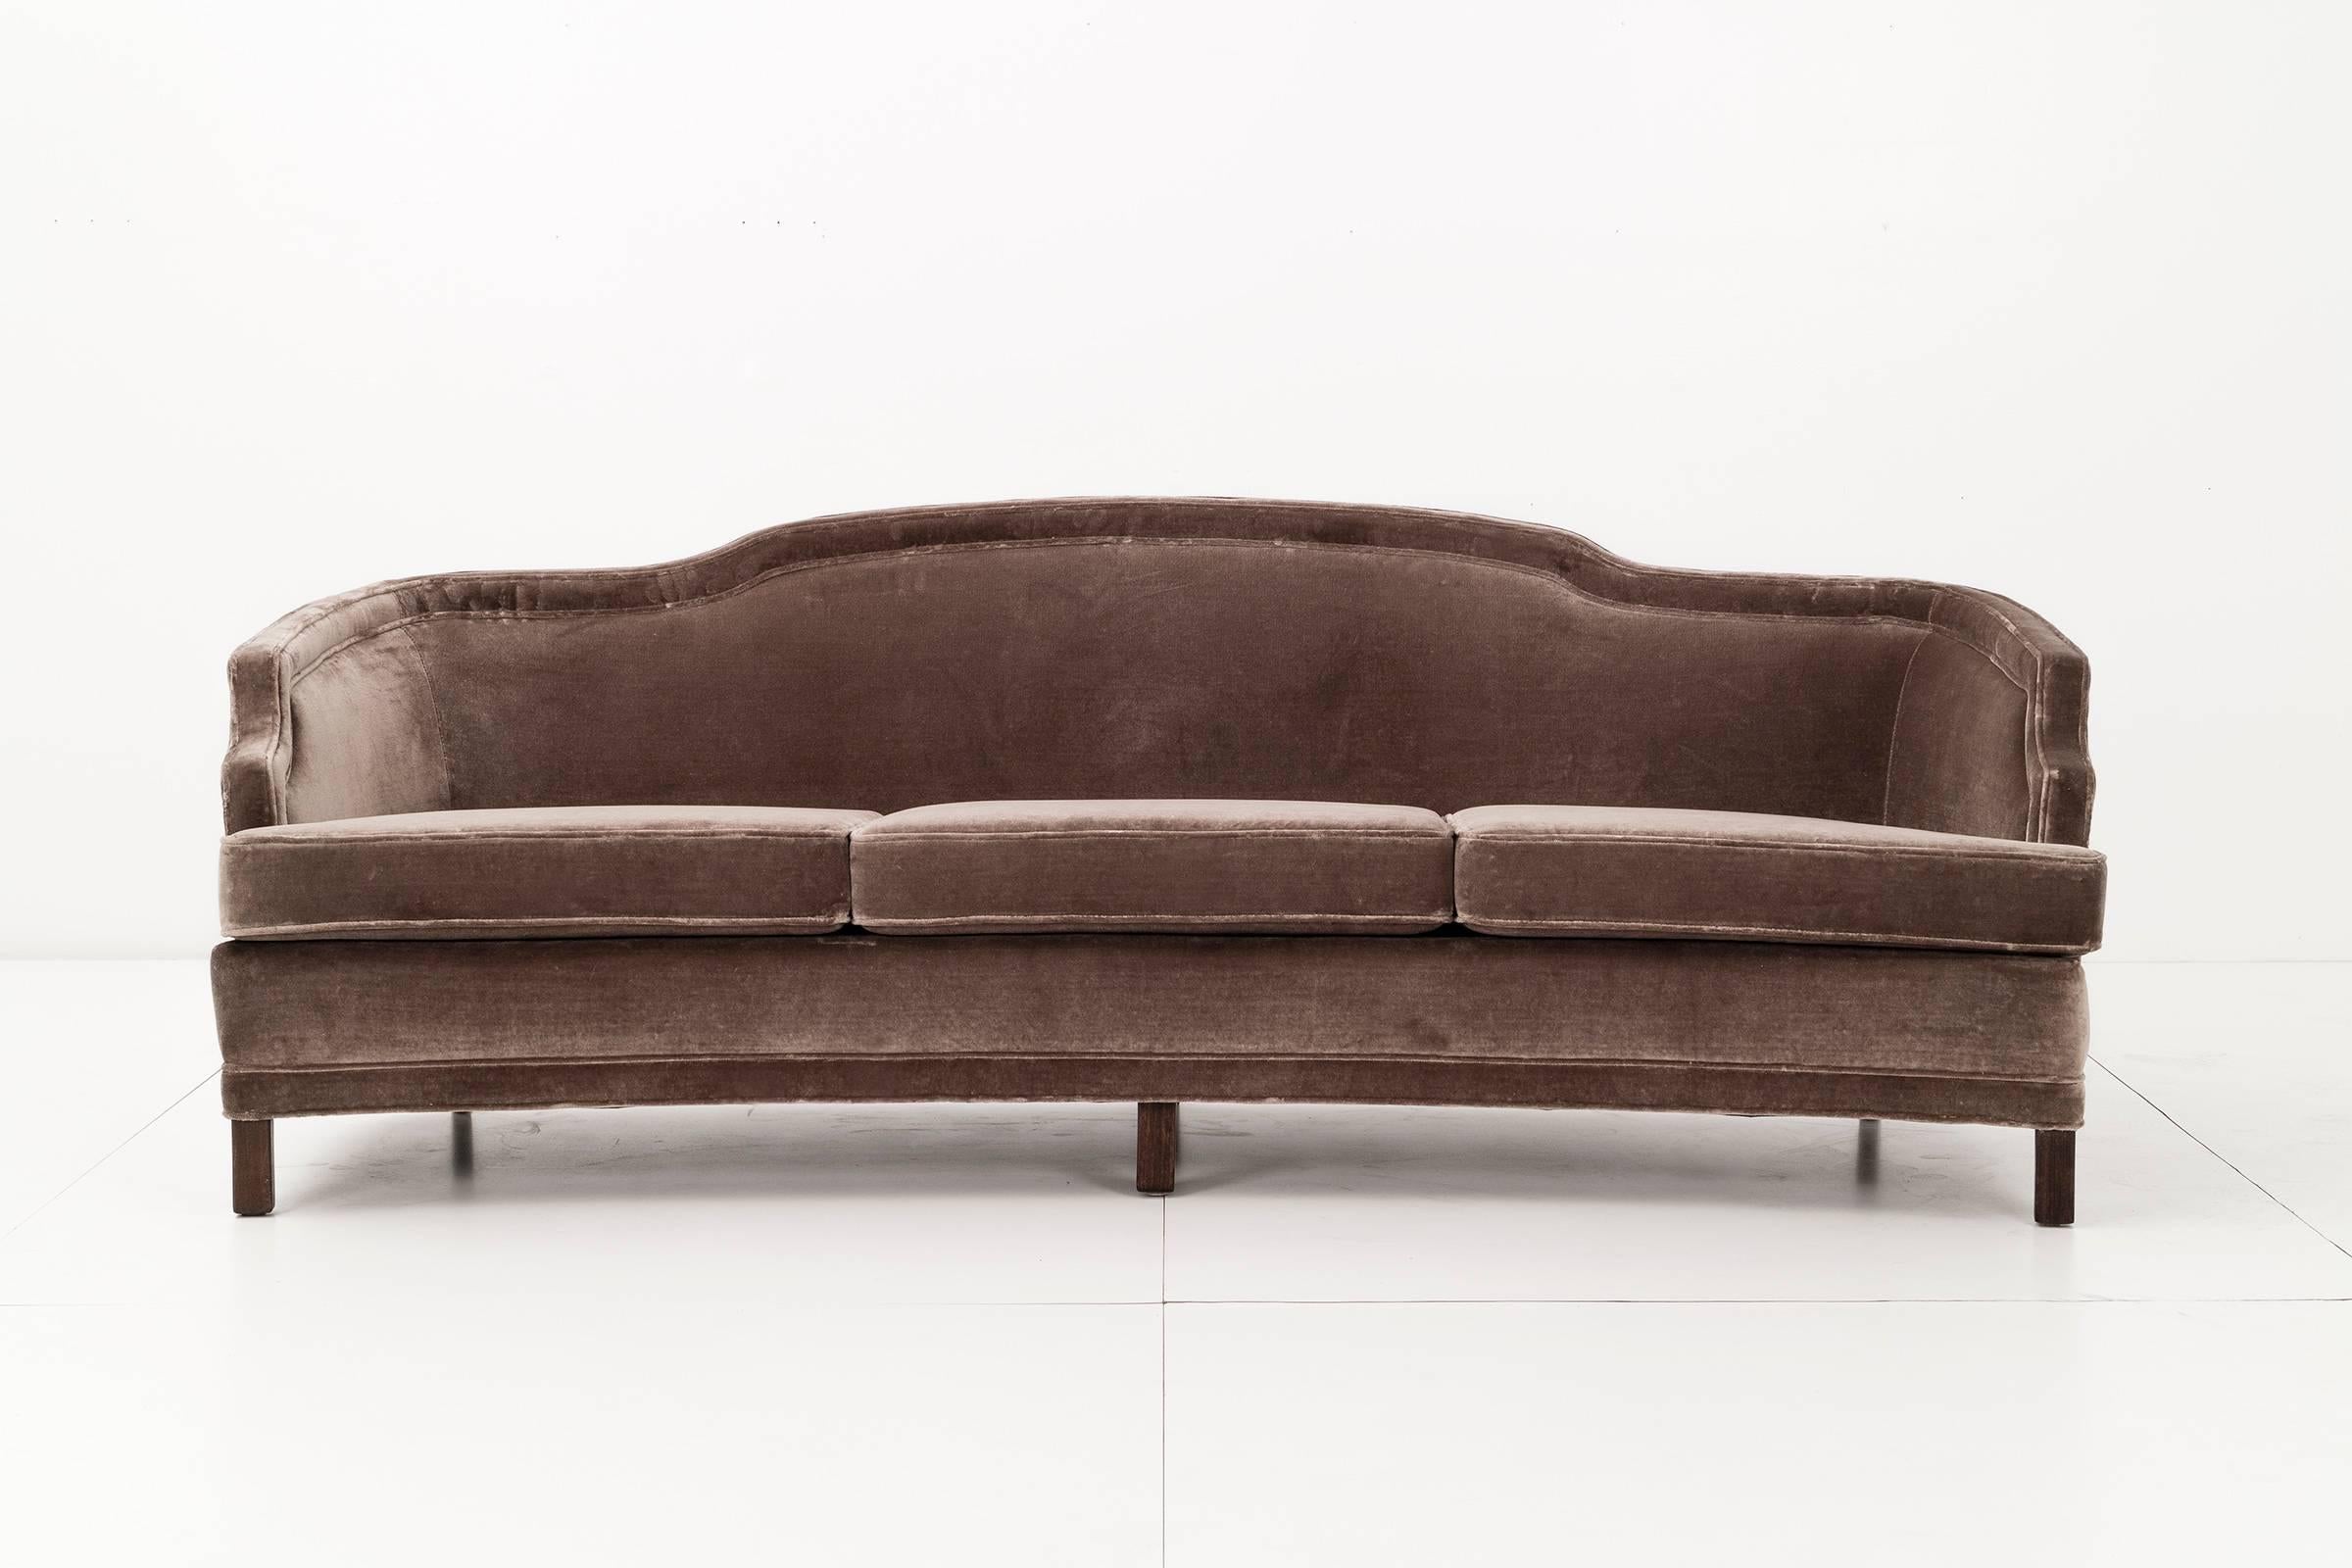 Newly upholstered in velvet. Curved sofa with sculptural lines. Walnut legs.